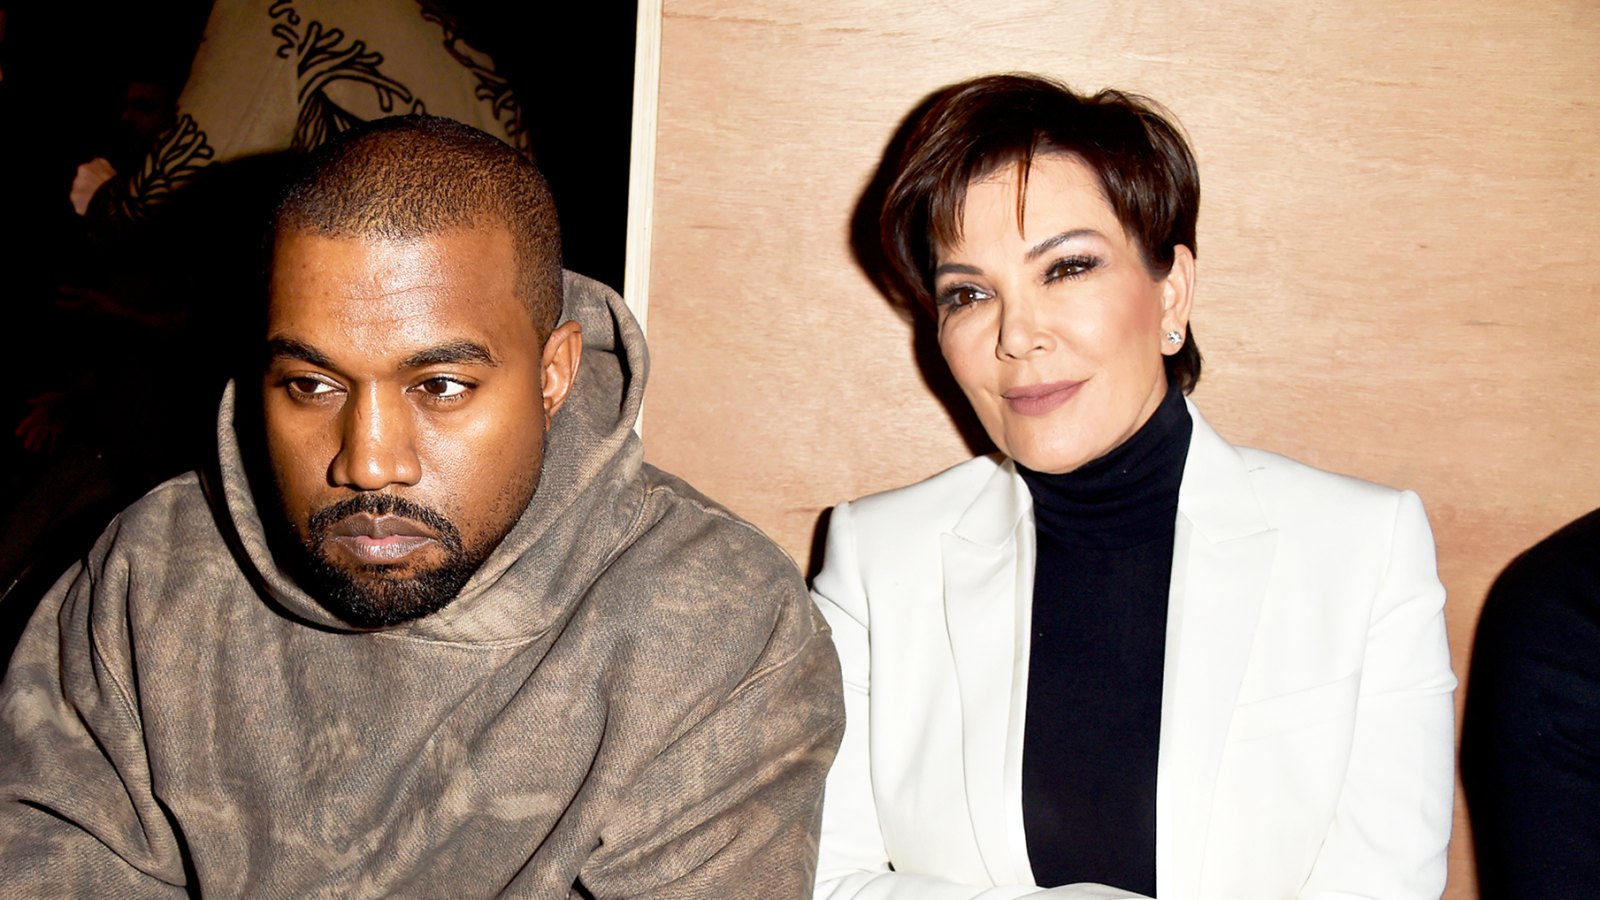 Kanye West and Kris Jenner attend the Givenchy show during Paris Fashion Week Womenswear Fall/Winter 2016/2017 in Paris, France.